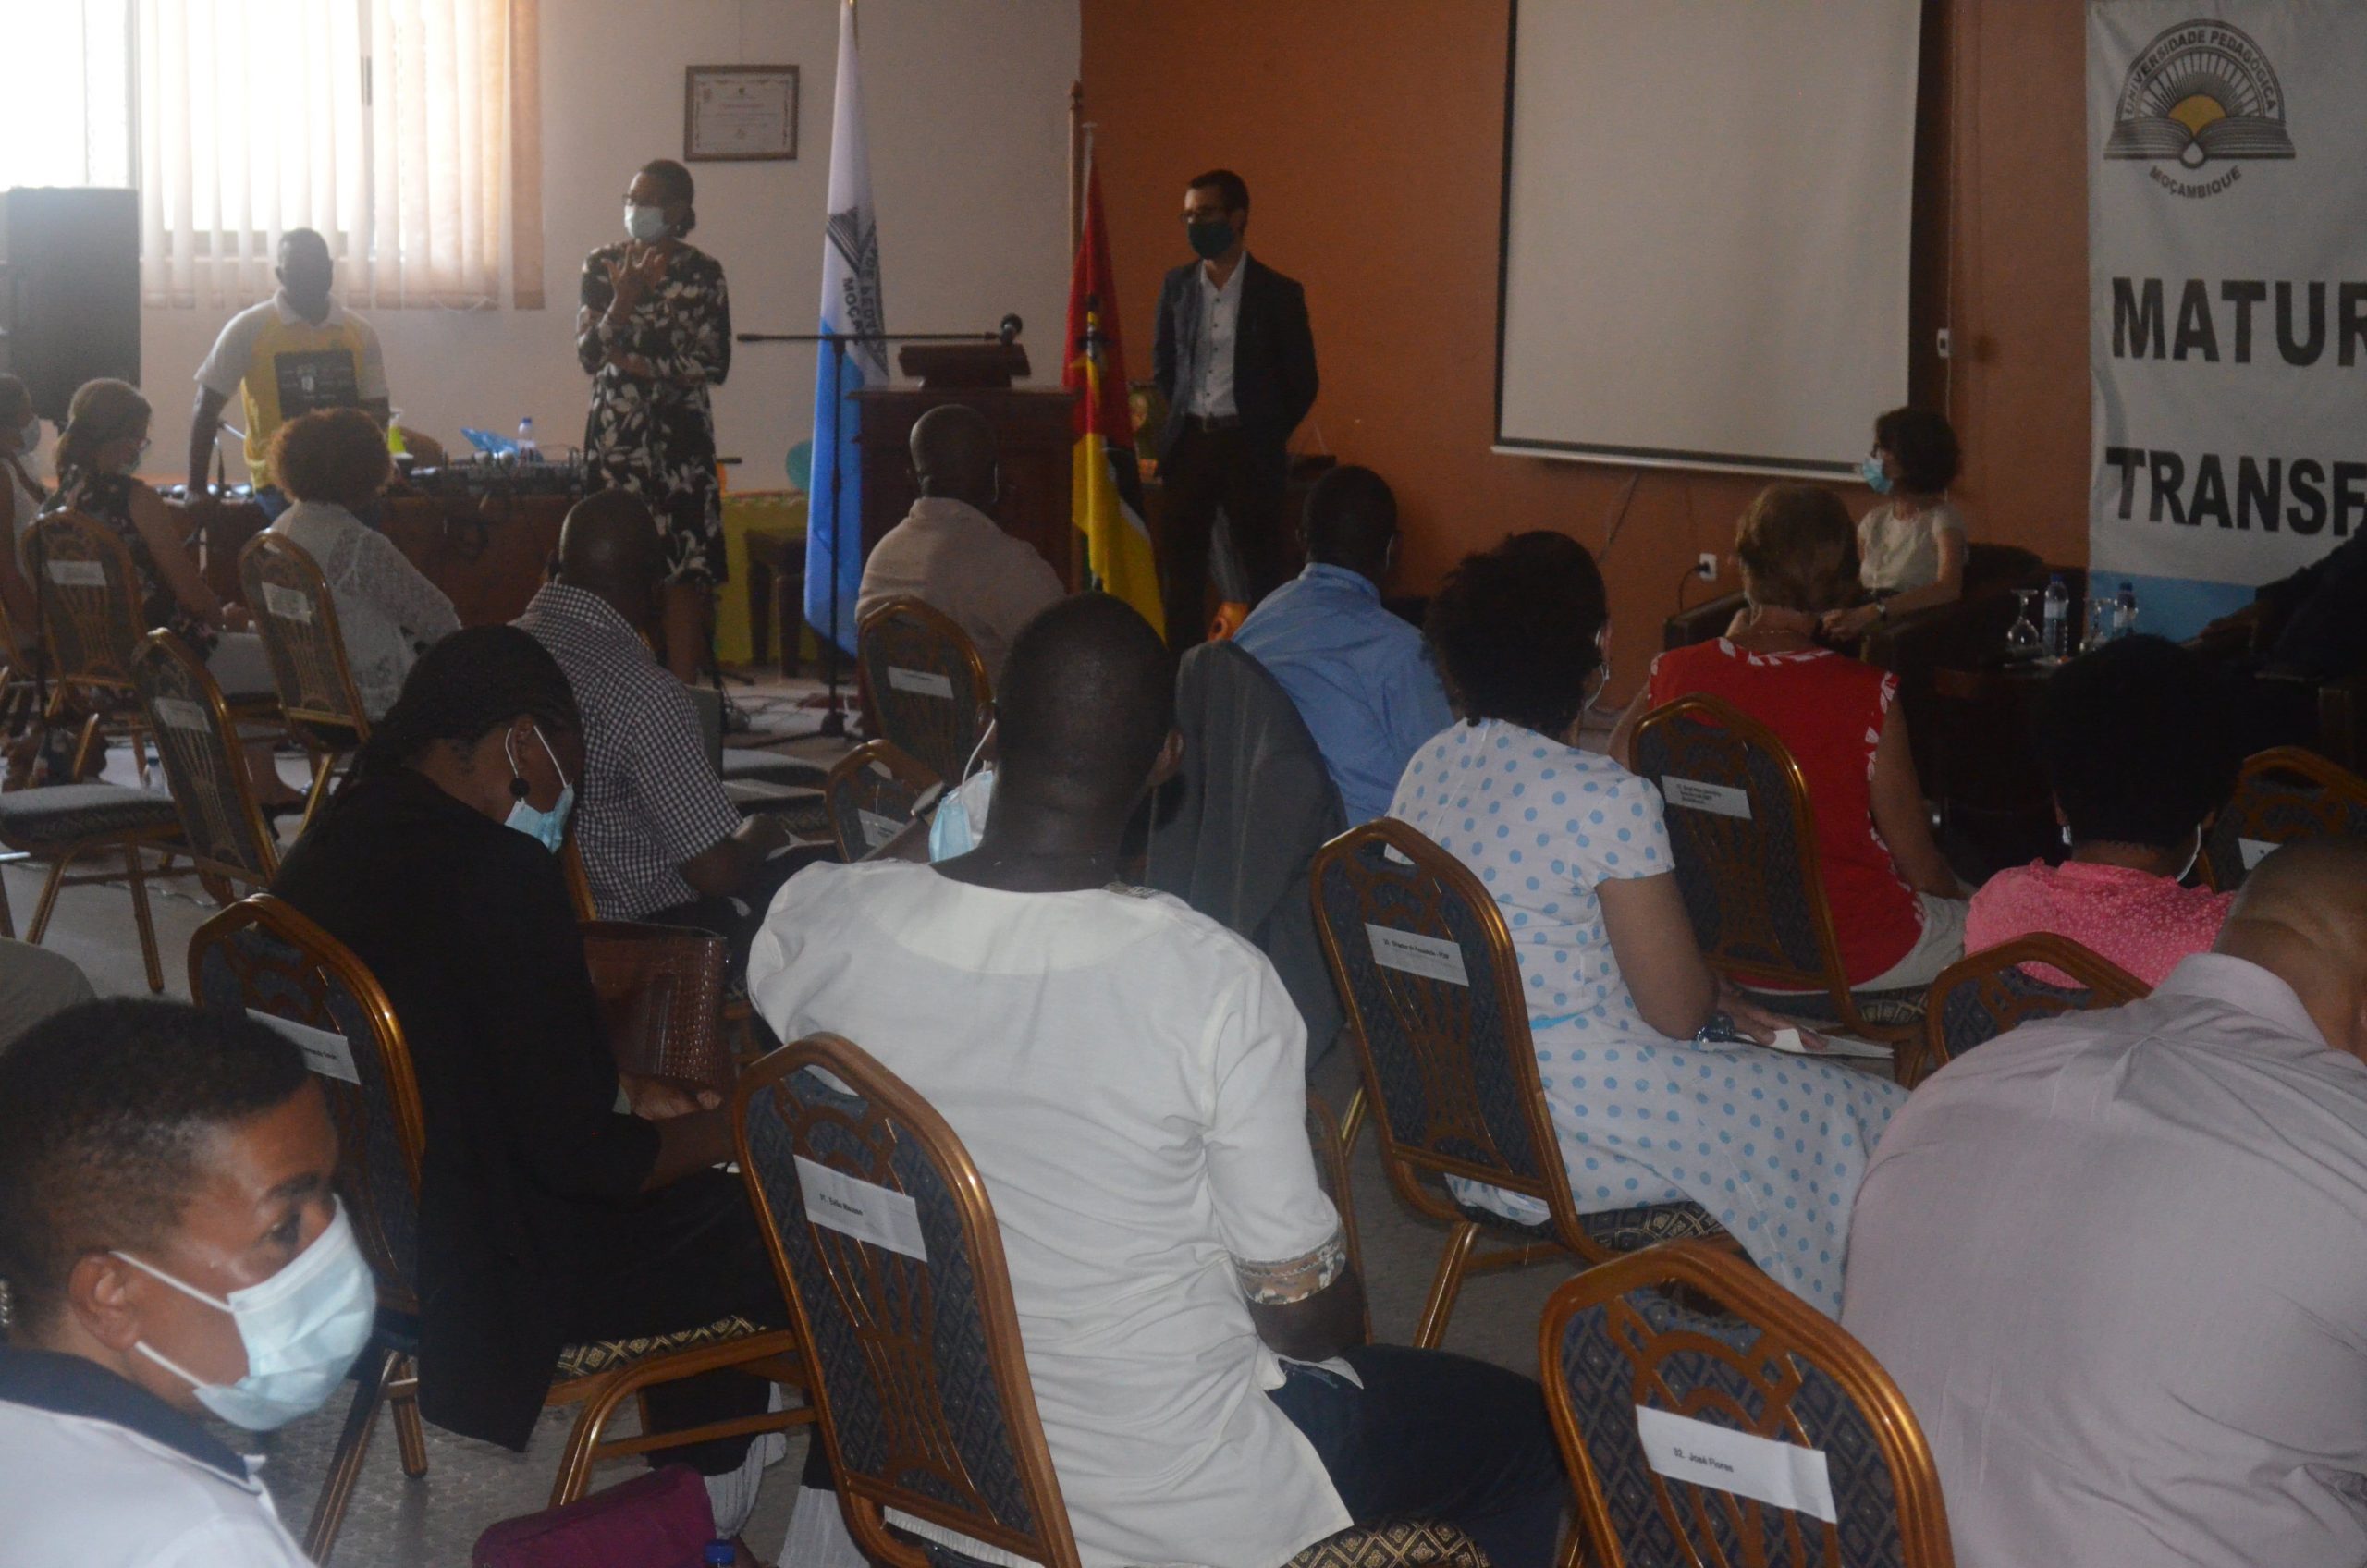 The kick-off event of the Theory-Practice Balance in Teacher Education Project was organised at the Universidade Pedagogica de Maputo. Participants sitting in the event room, most of the people are wearing face masks.